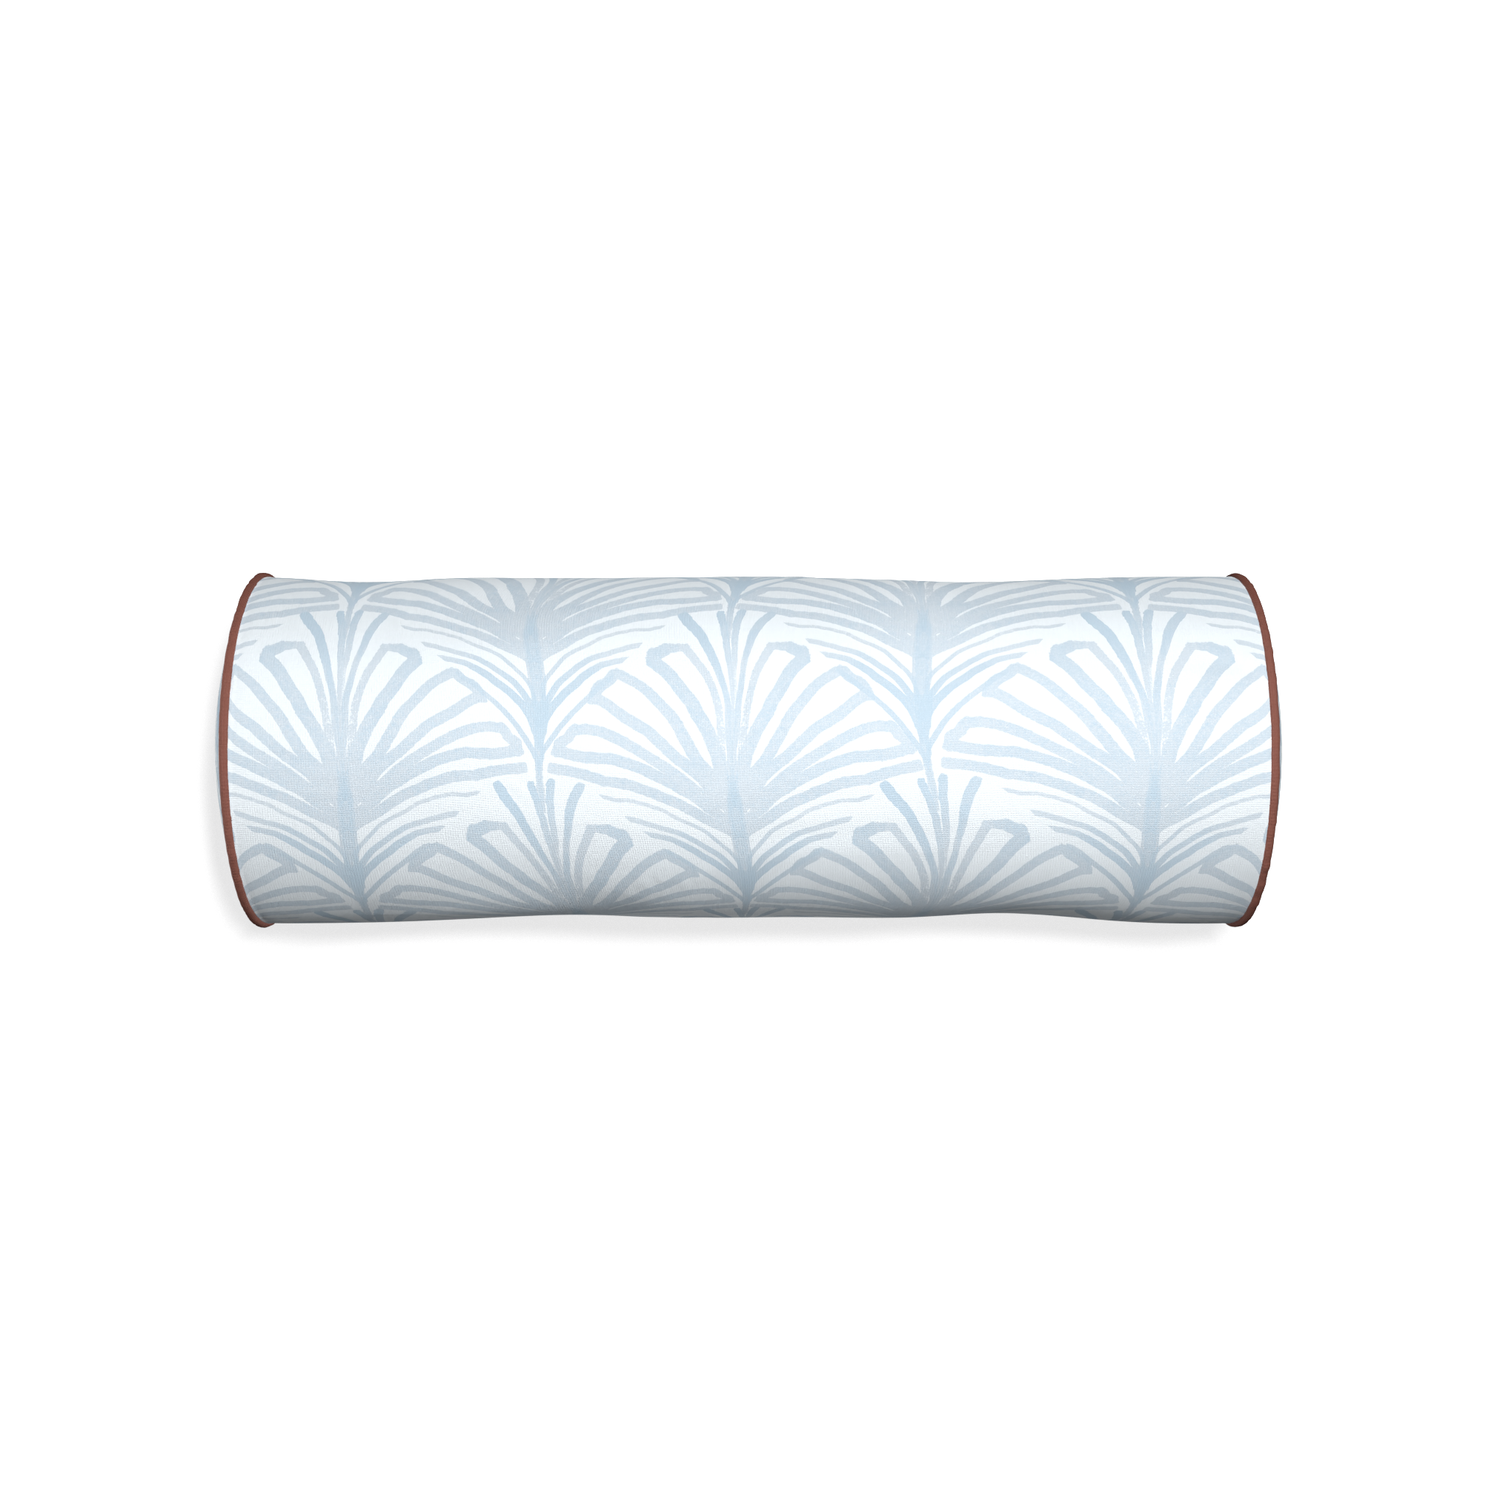 Bolster suzy sky custom sky blue palmpillow with w piping on white background